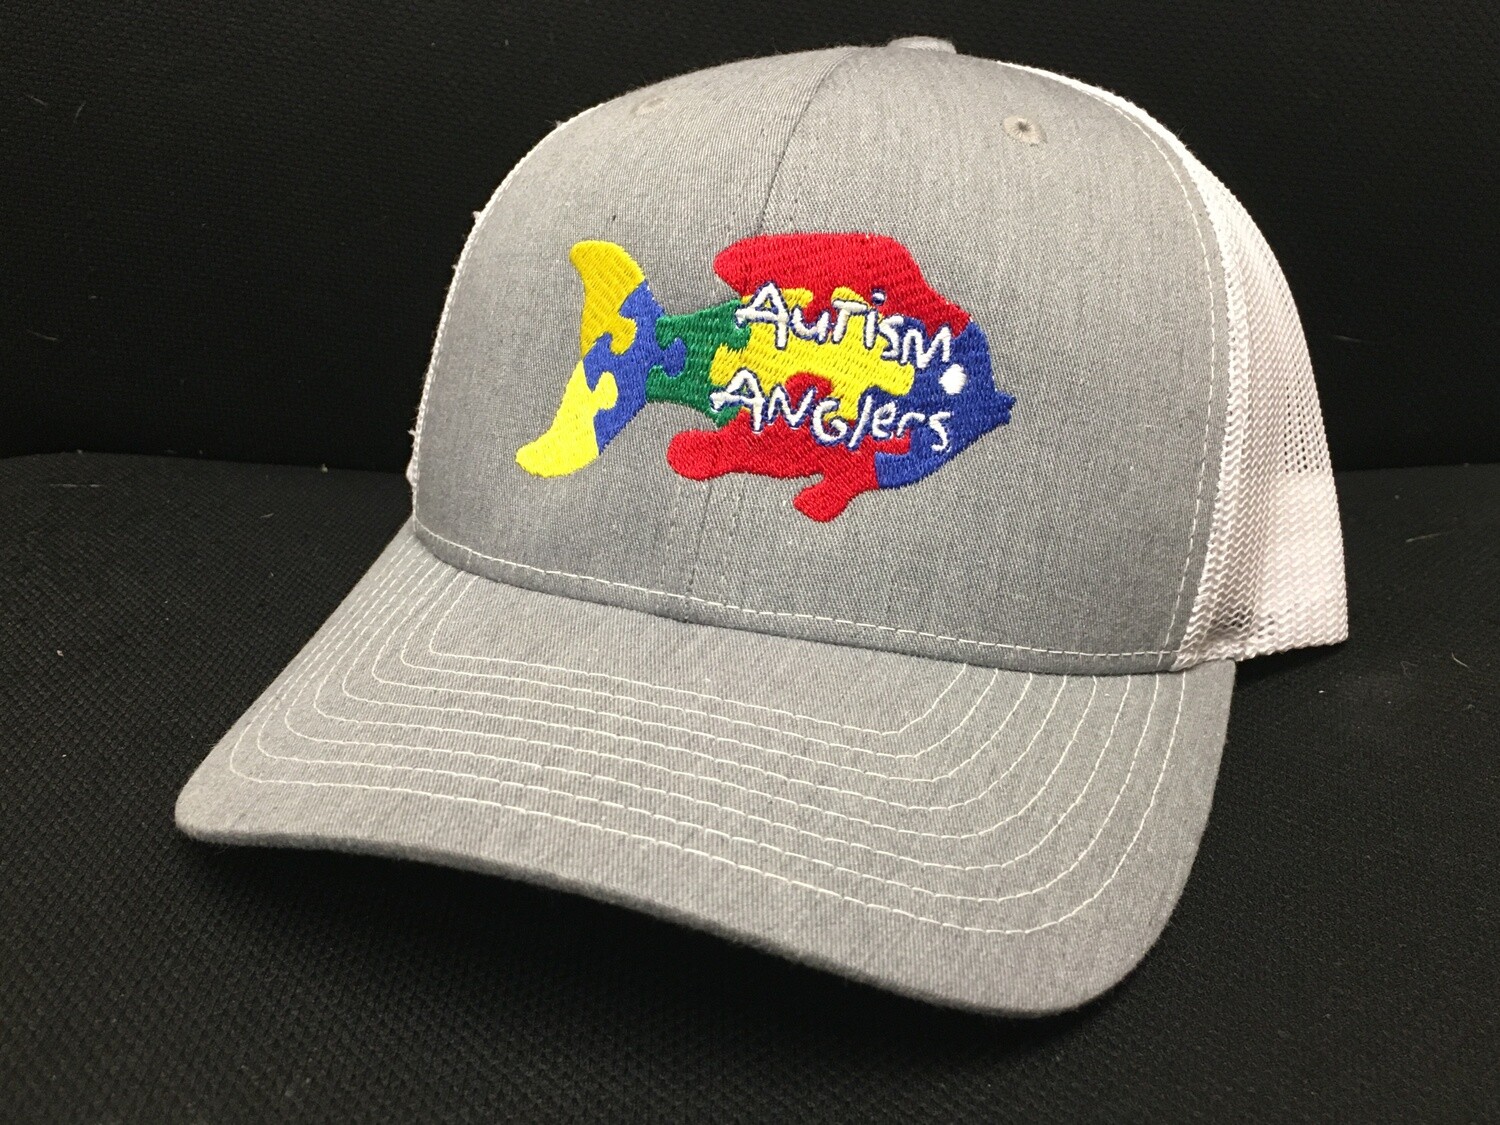 Autism Anglers Snap Back Hat- Grey/White